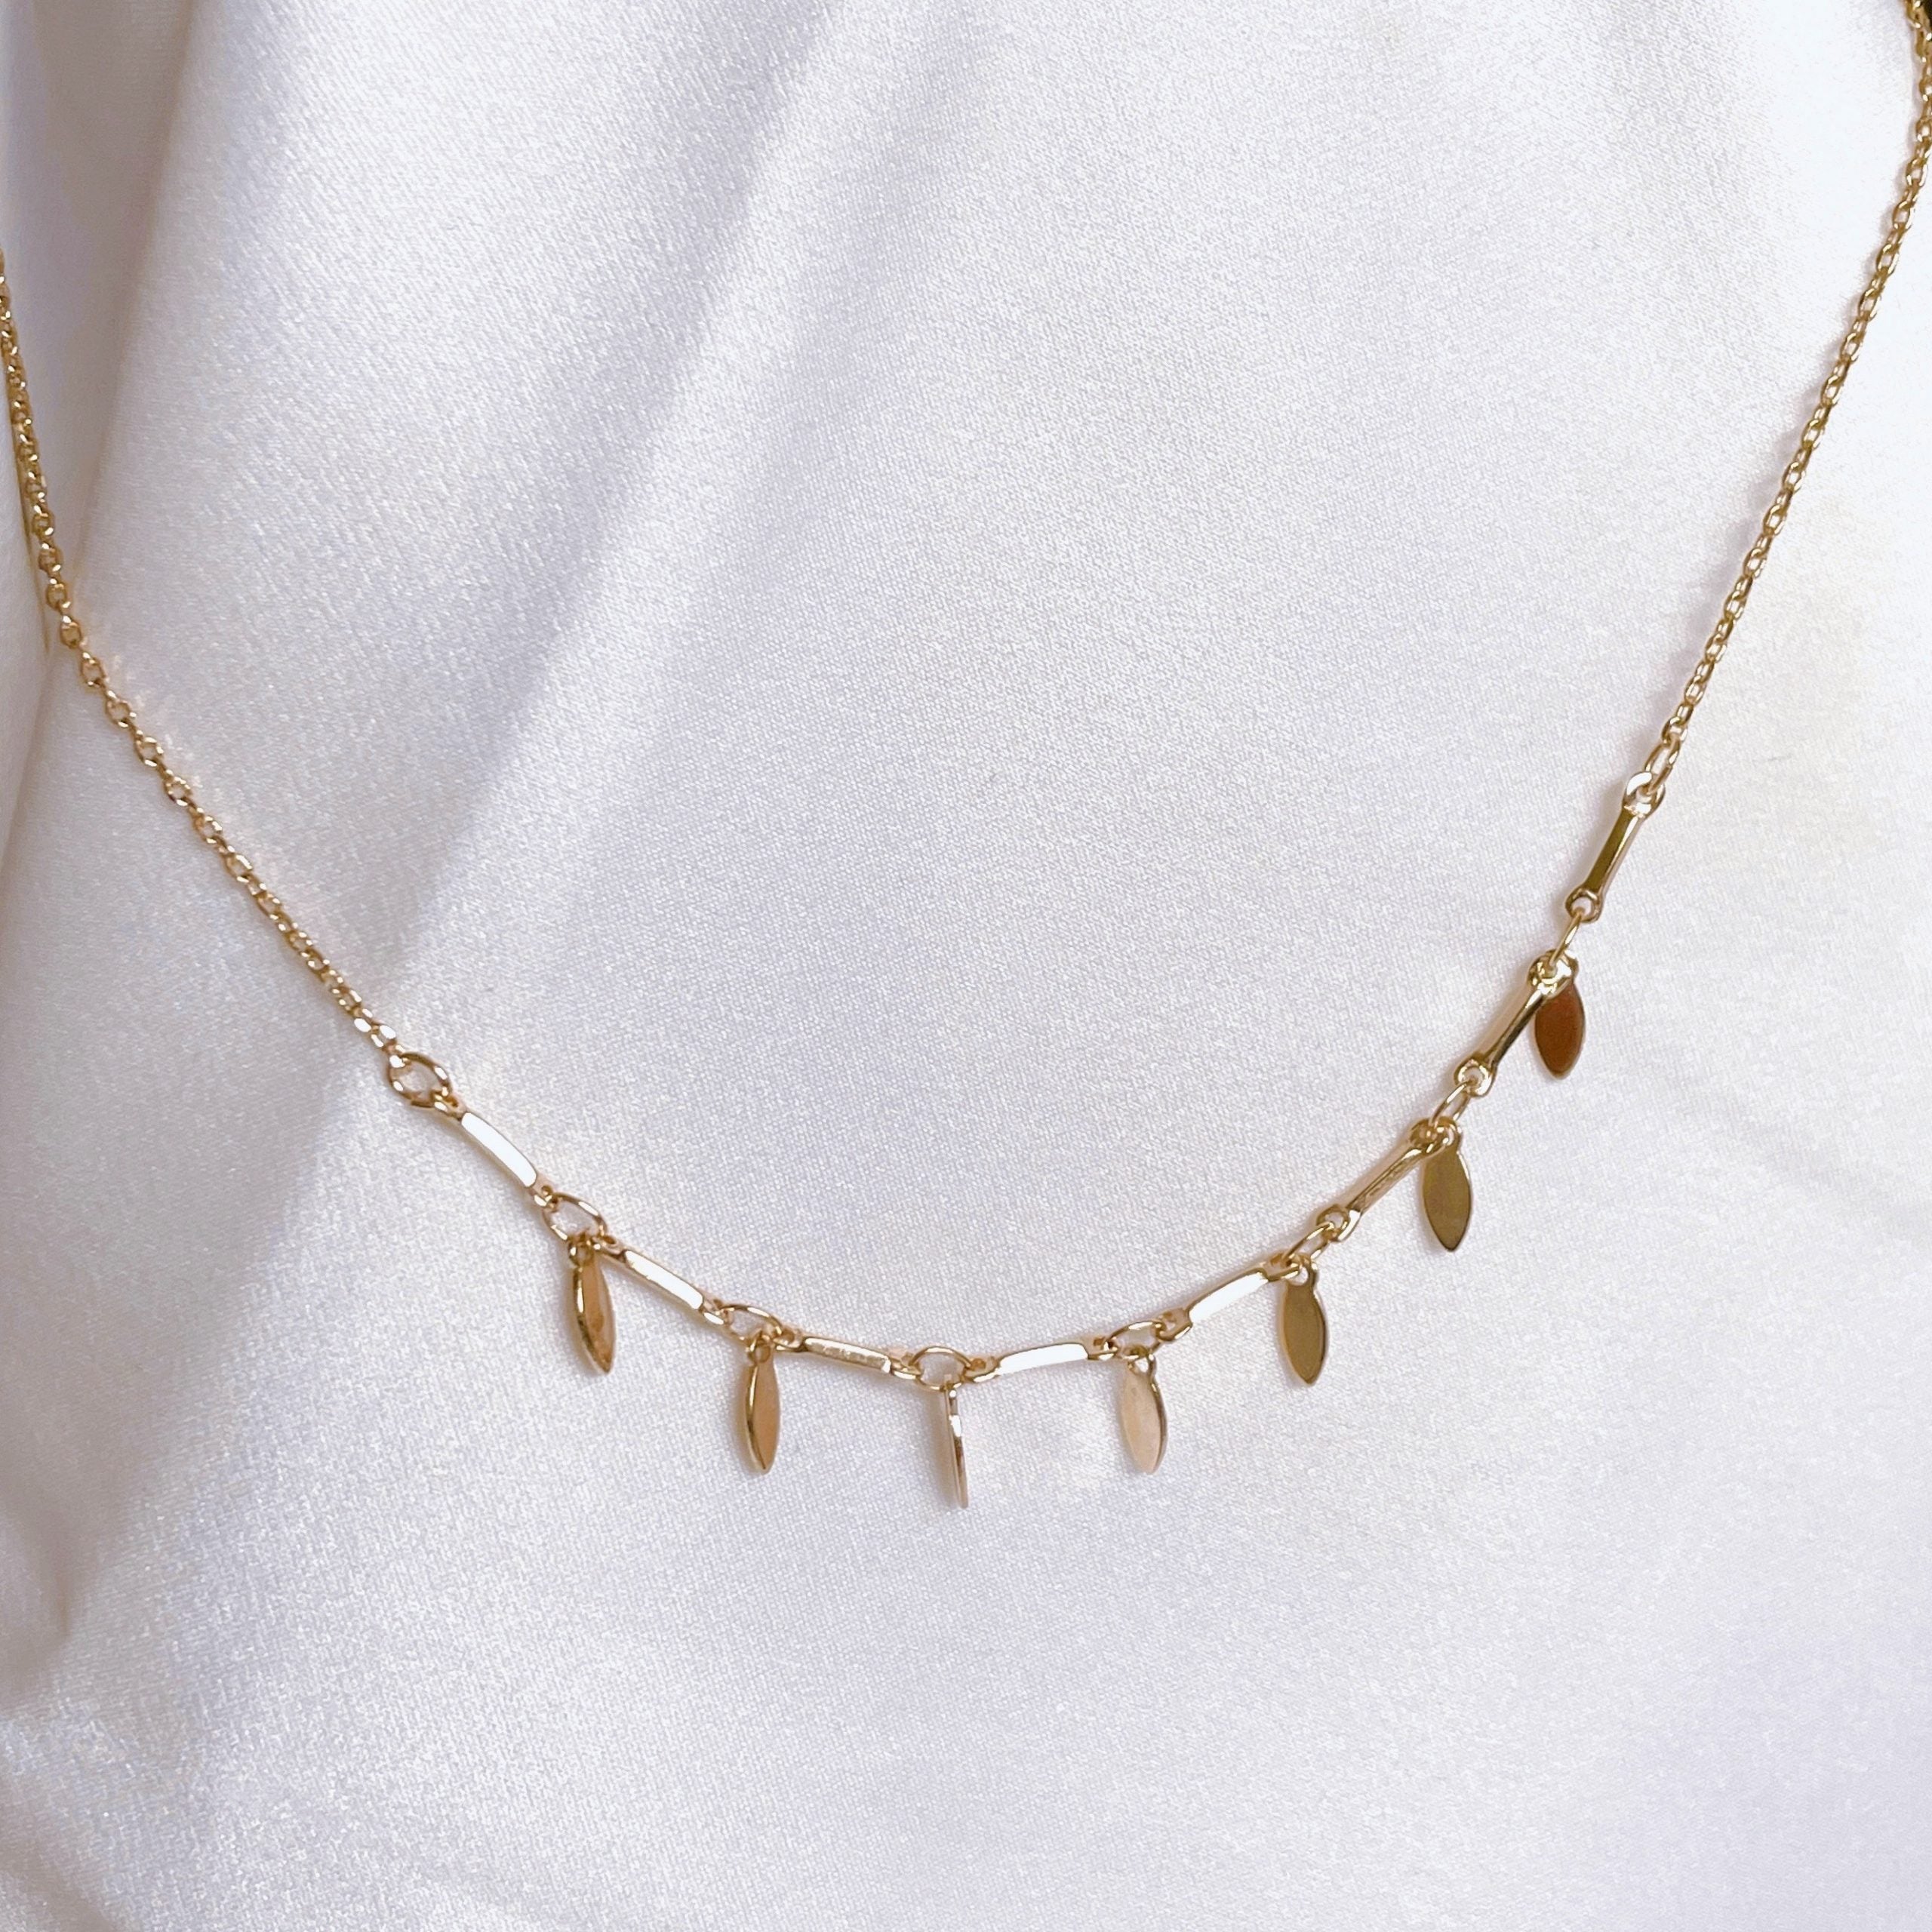 Gold-plated “Plumettes” necklace